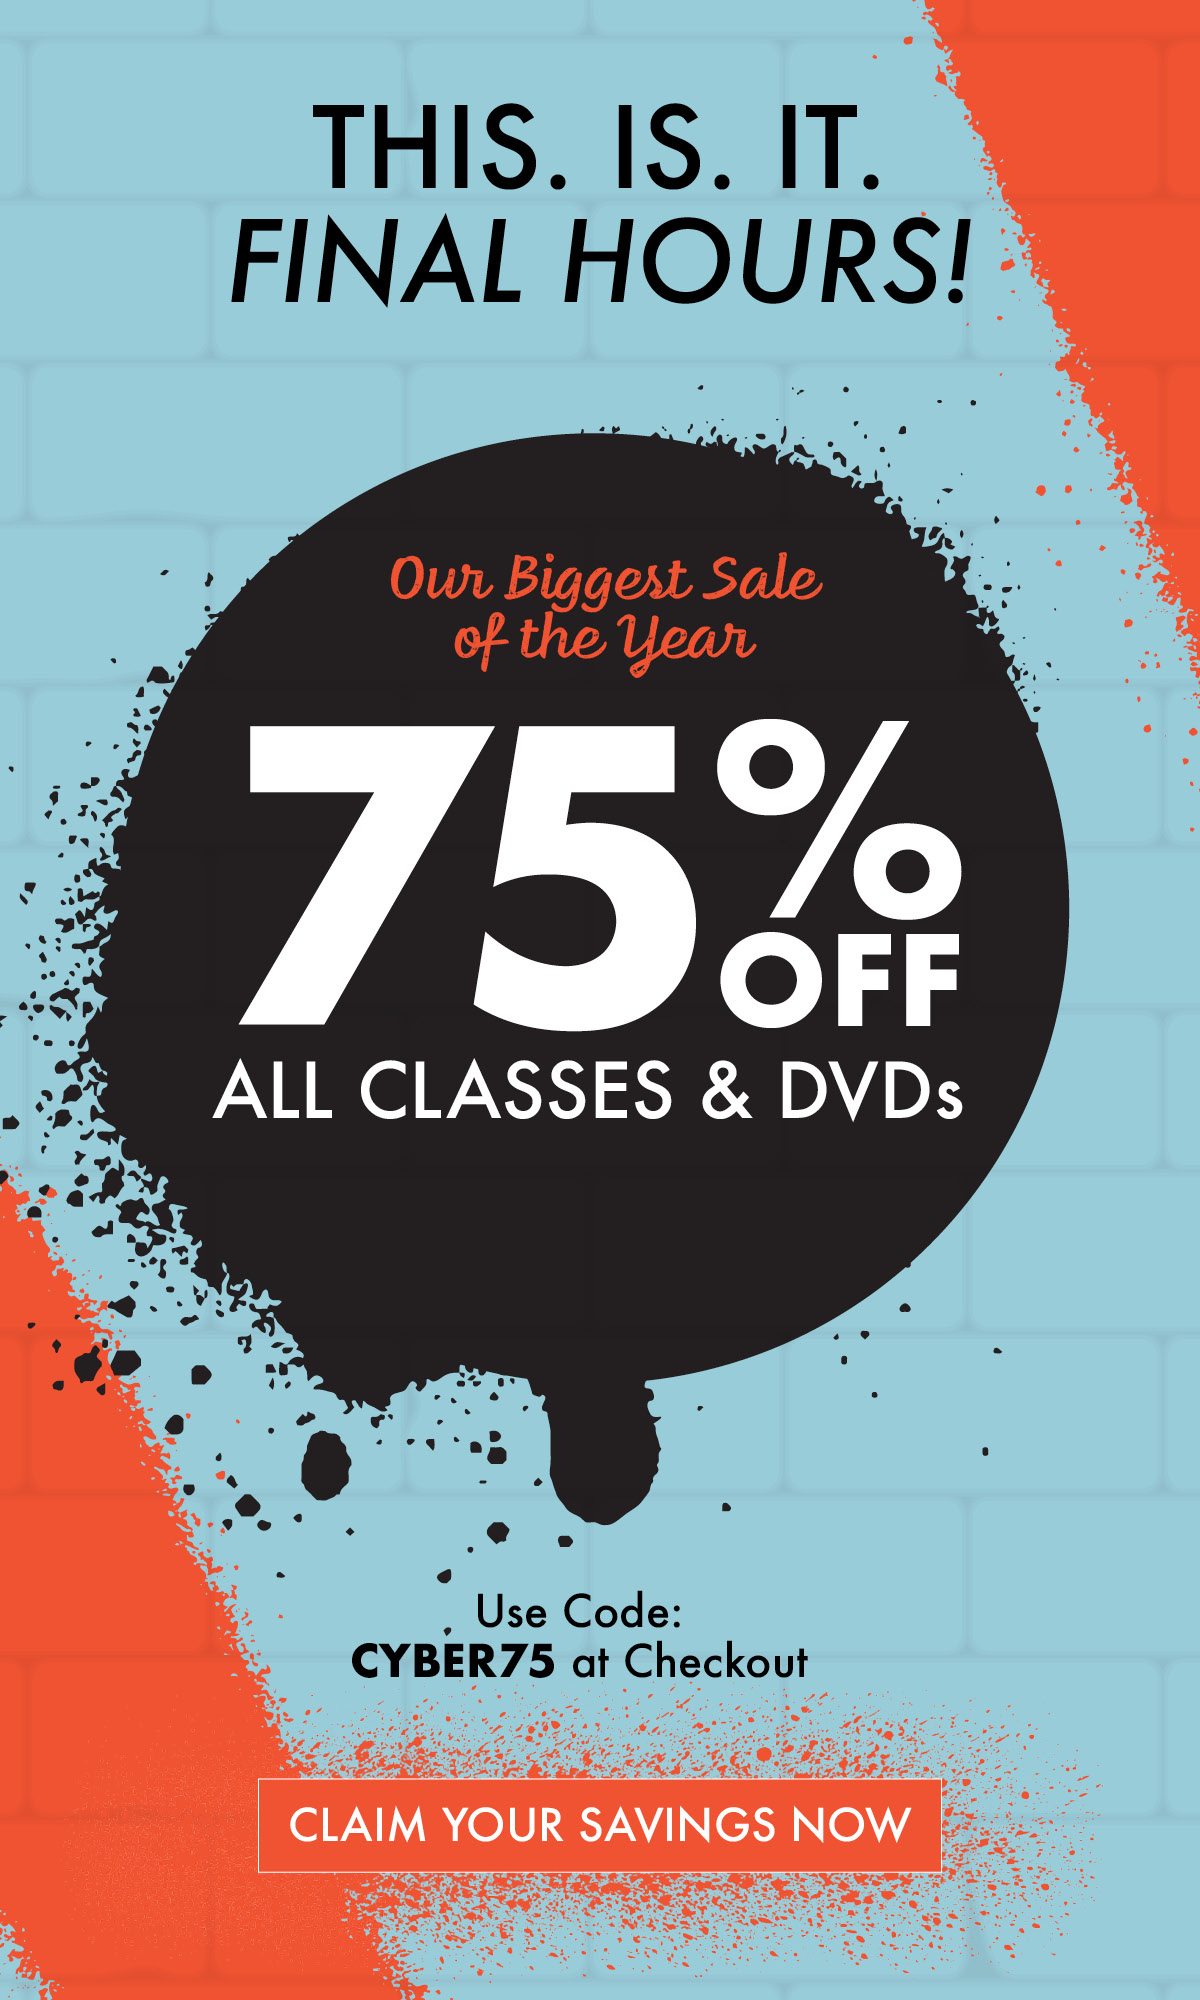 This. Is. It. Final Hours! Our Biggest Sale of the Year 75% OFF ALL CLASSES & DVDs Ends Tonight Use Code: CYBER75 at Checkout